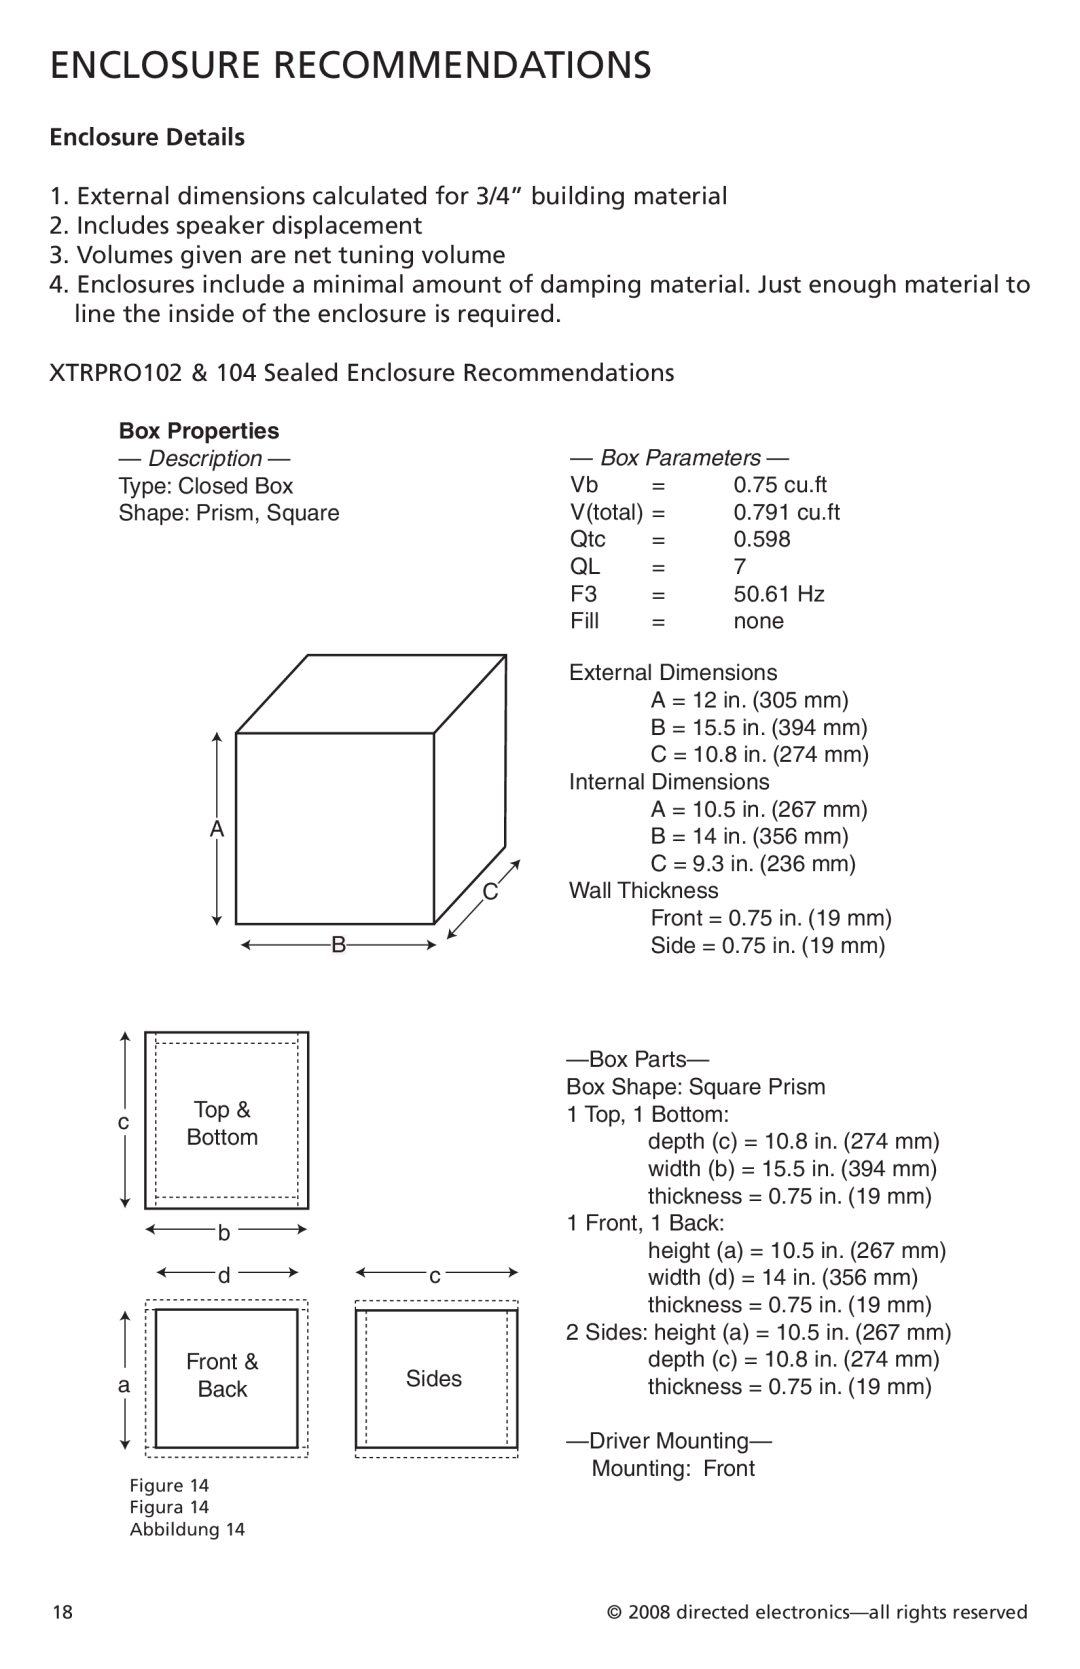 Orion Car Audio XTRPRO152 Enclosure Recommendations, Includes speaker displacement, Volumes given are net tuning volume 